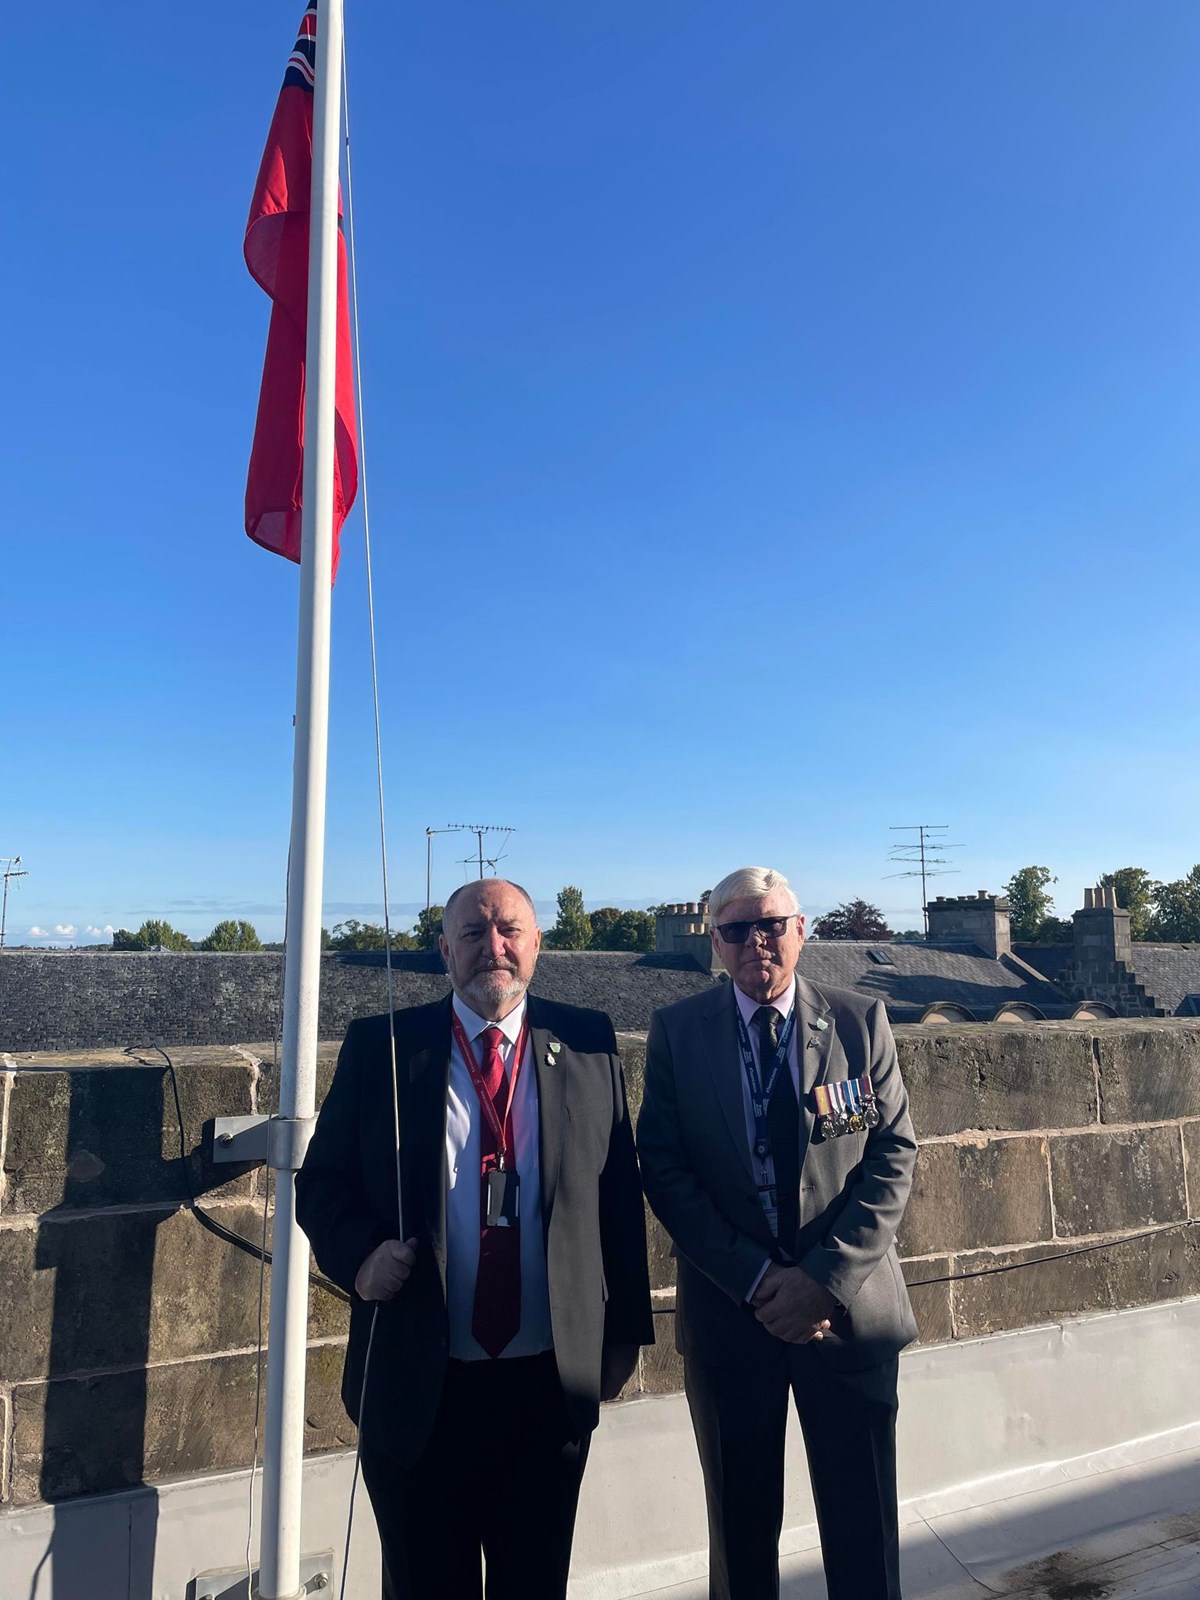 The council’s Royal Navy veteran – Cllr John Diver (left) stands with the council's Armed Forces and Veterans' Champion – Cllr Peter Bloomfield to raise the Red Ensign flag this morning (1 September) ahead of Merchant Navy Day on Sunday 3 September.